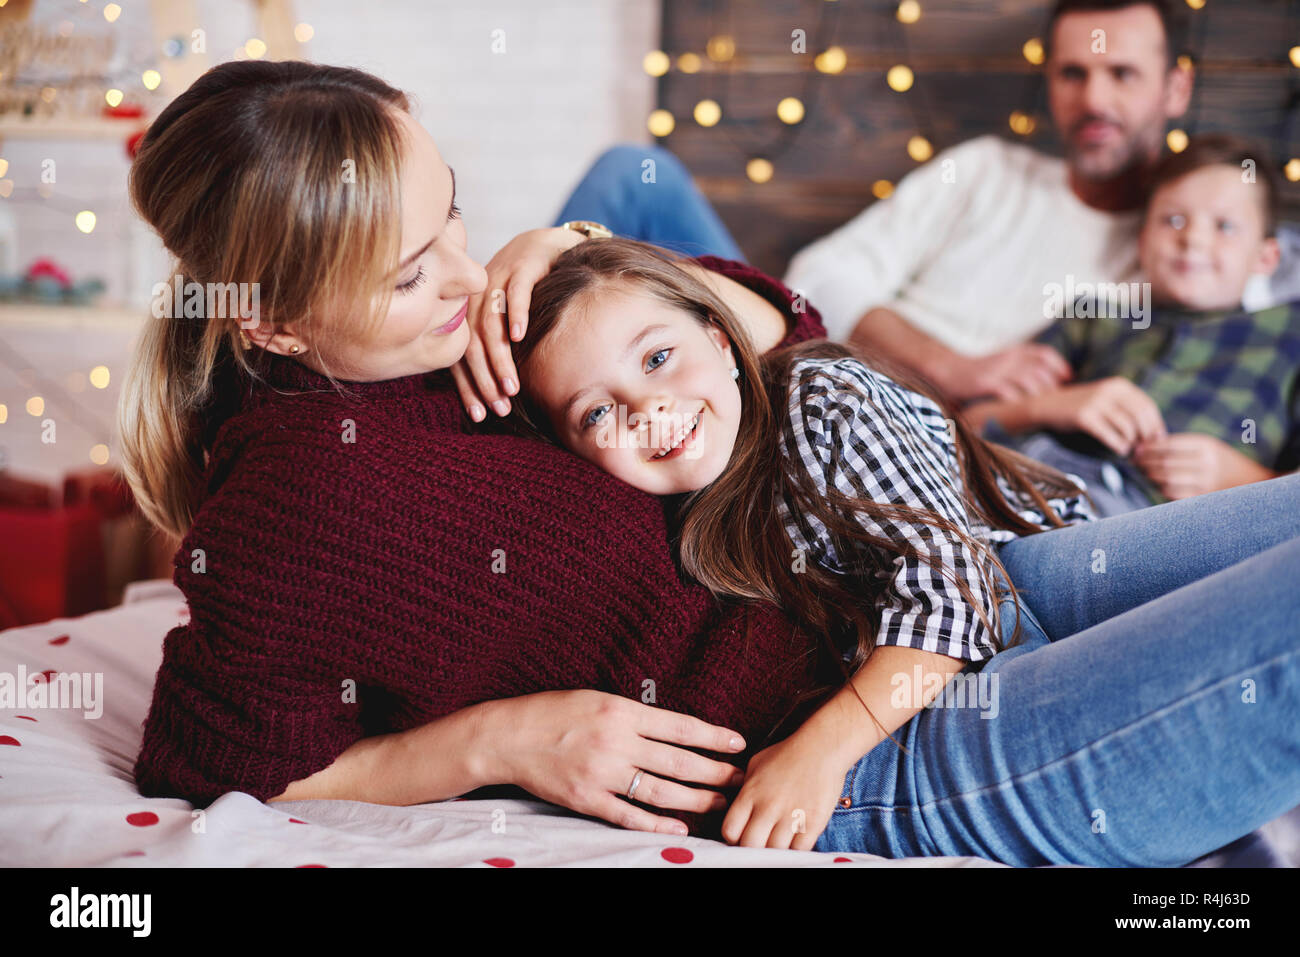 Affectionate mother embracing her daughter Stock Photo